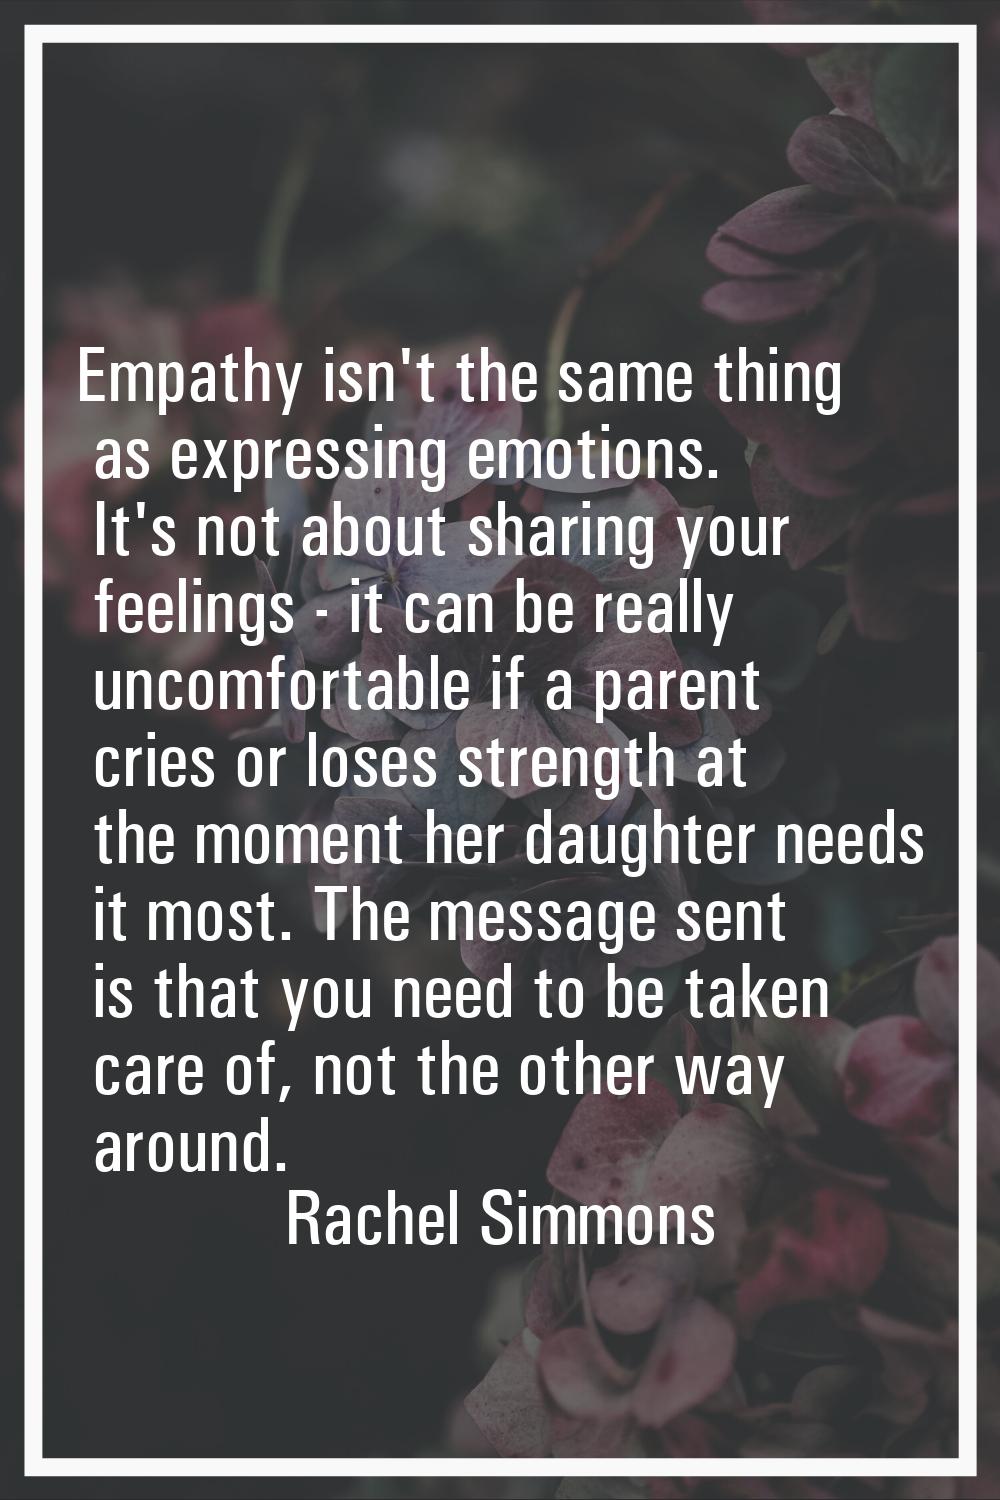 Empathy isn't the same thing as expressing emotions. It's not about sharing your feelings - it can 